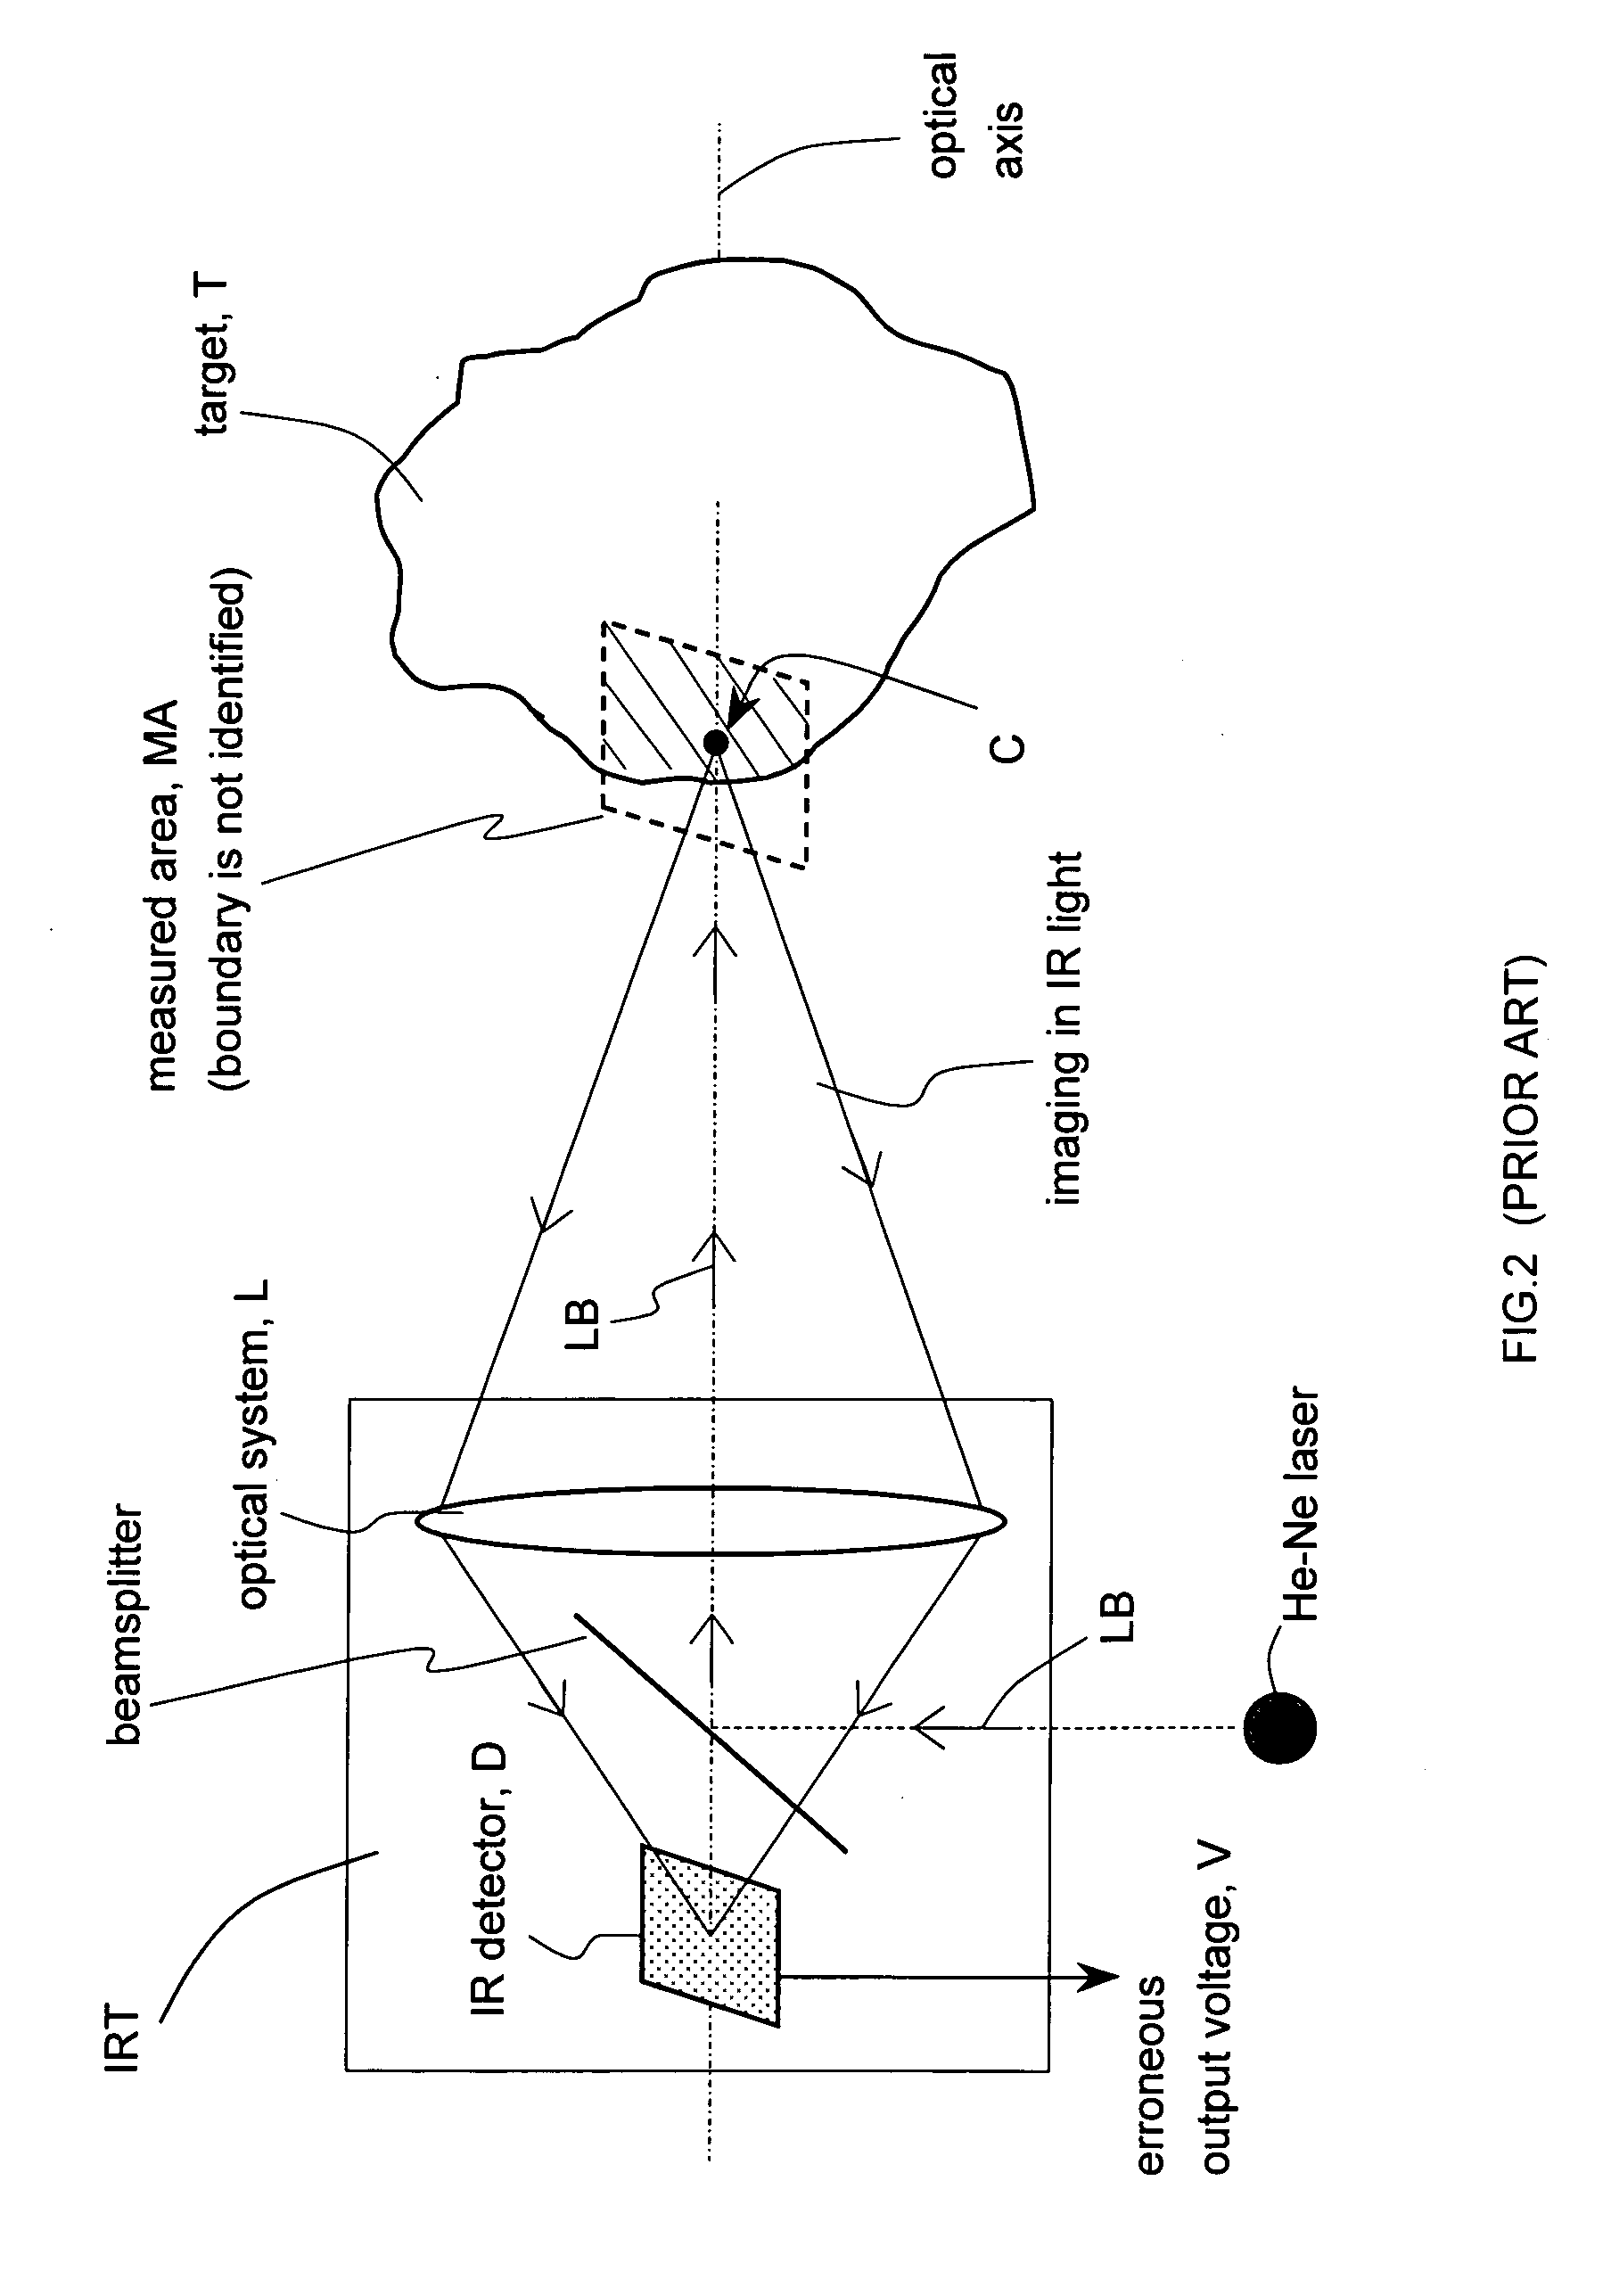 Infrared thermometer with through-the-lens visible targeting system